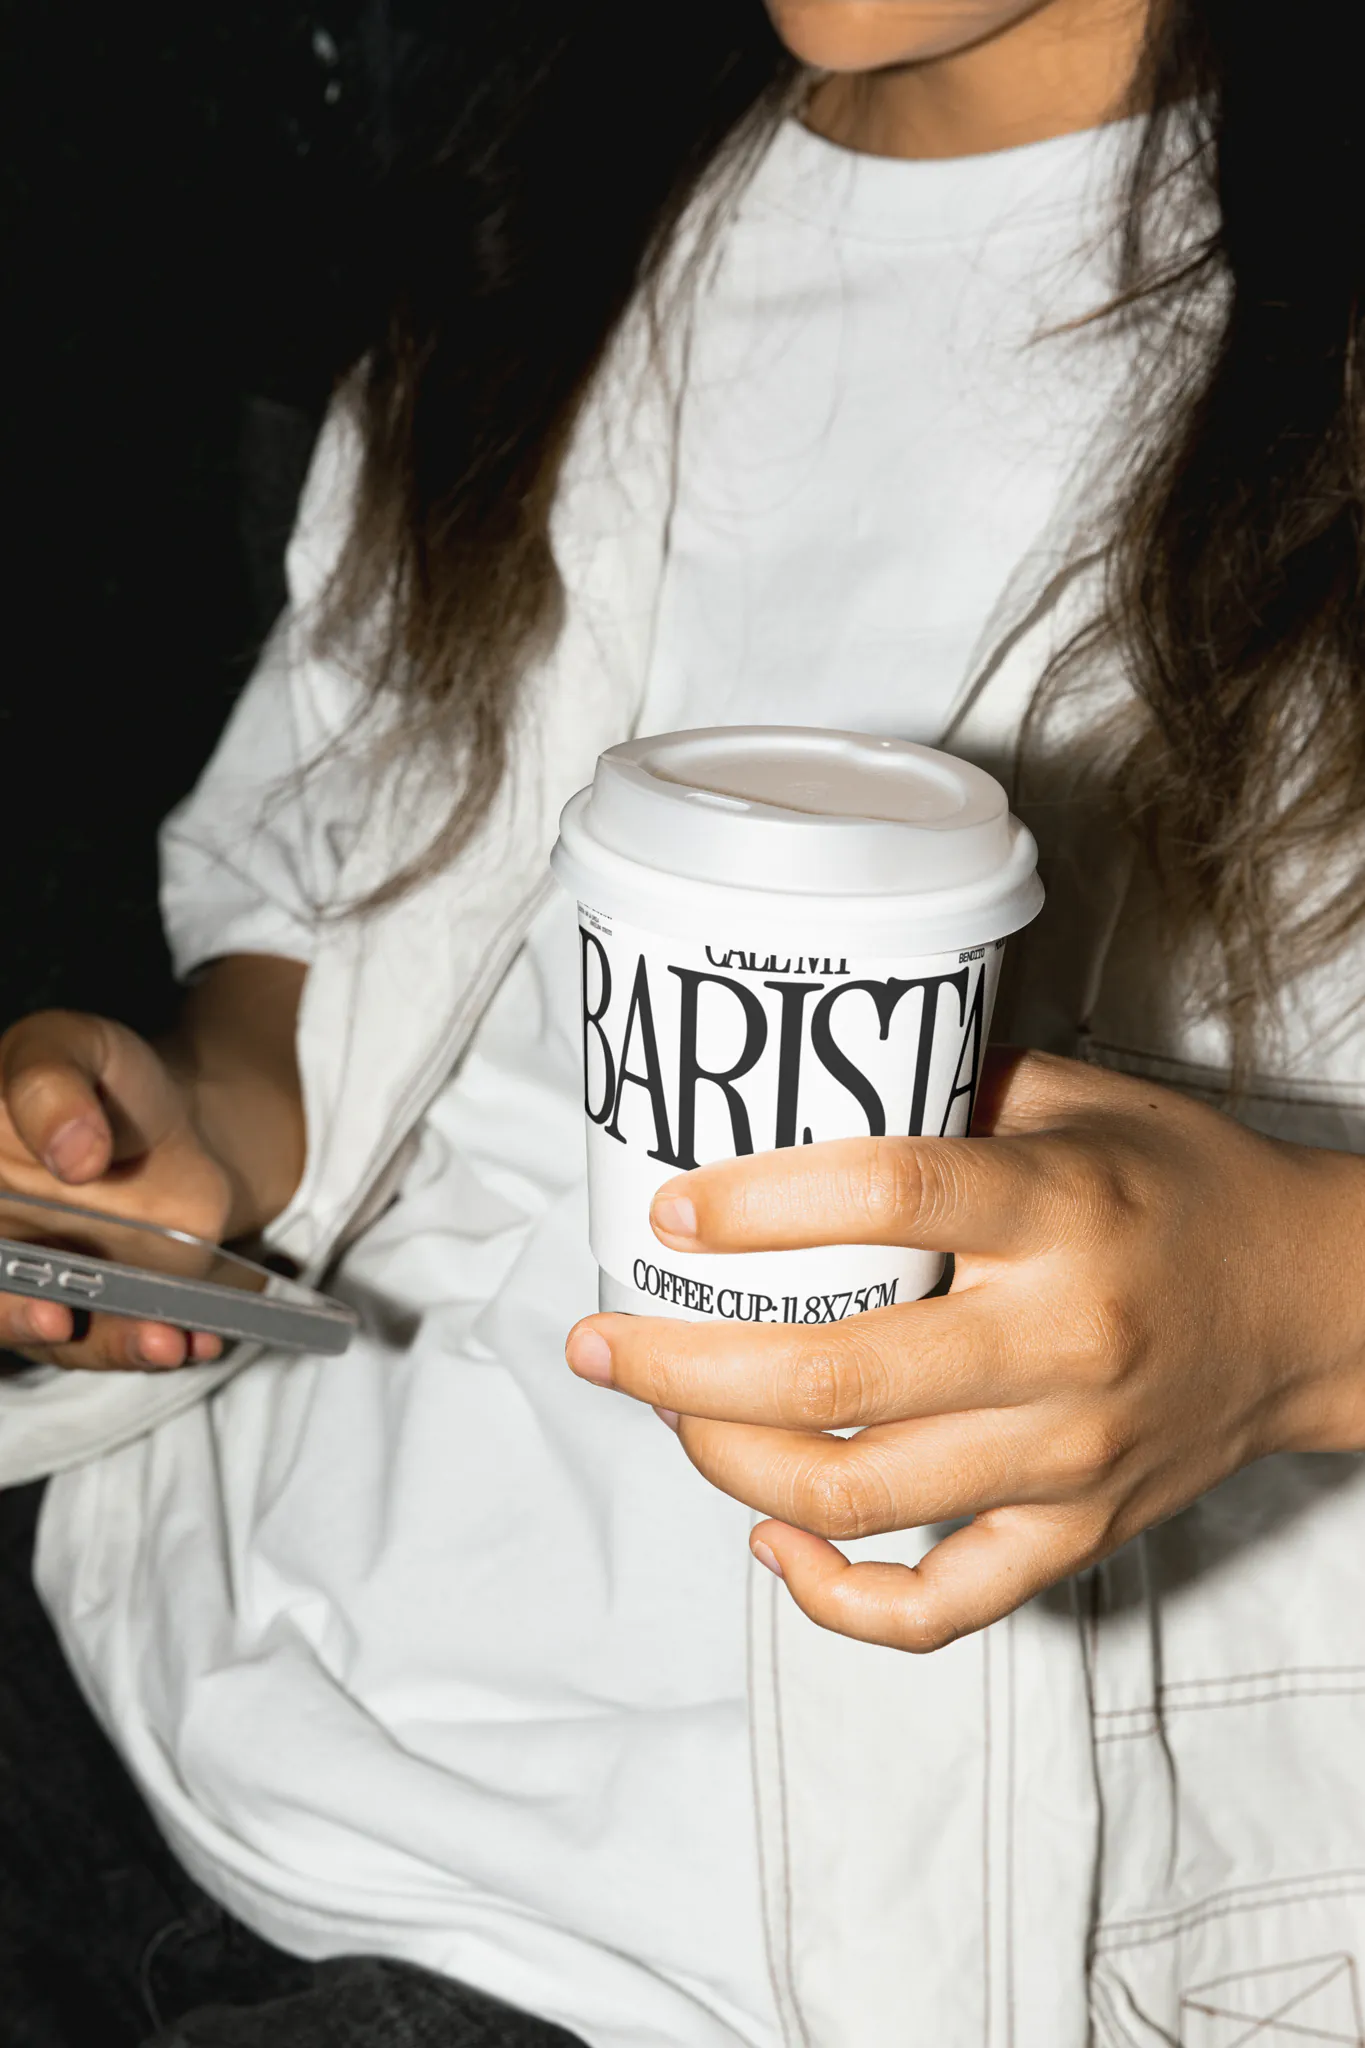 Female hand holding a coffee cup mockup in a coffee shop. Coffee cup mockup being grabbed by a girl, wearing street-style clothes. Hand holding cardboard coffee cup mockup, paper cup mockup, tea cup mockup, high quality mockup, PSD file.